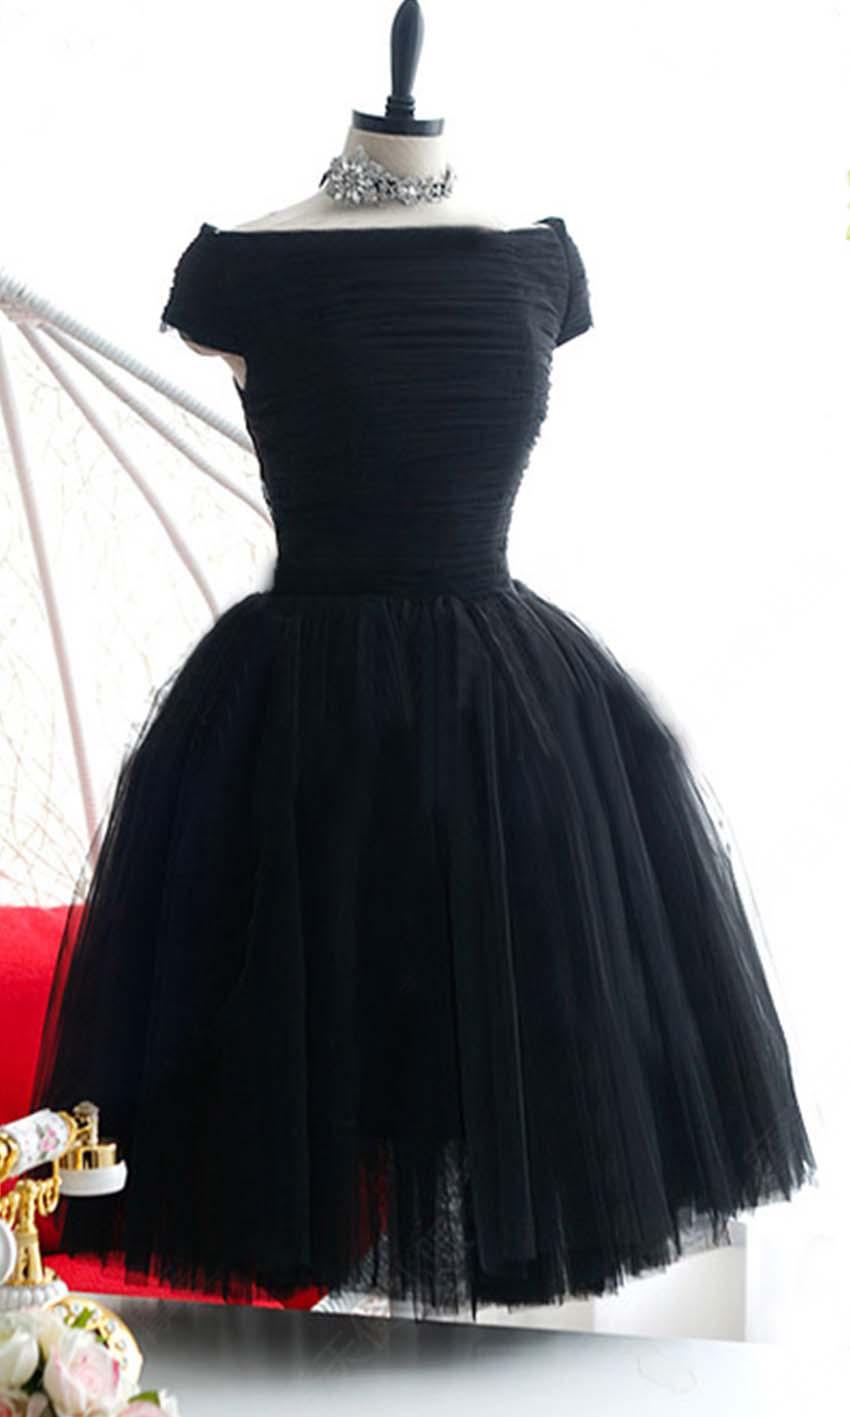 Wedding - Vintage Off The Shoulder Little Black Dress KSP352- £88.00 : Cheap Prom Dresses Uk, Bridesmaid Dresses, 2014 Prom & Evening Dresses, Look for cheap elegant prom dresses 2014, cocktail gowns, or dresses for special occasions? kissprom.co.uk offers various 